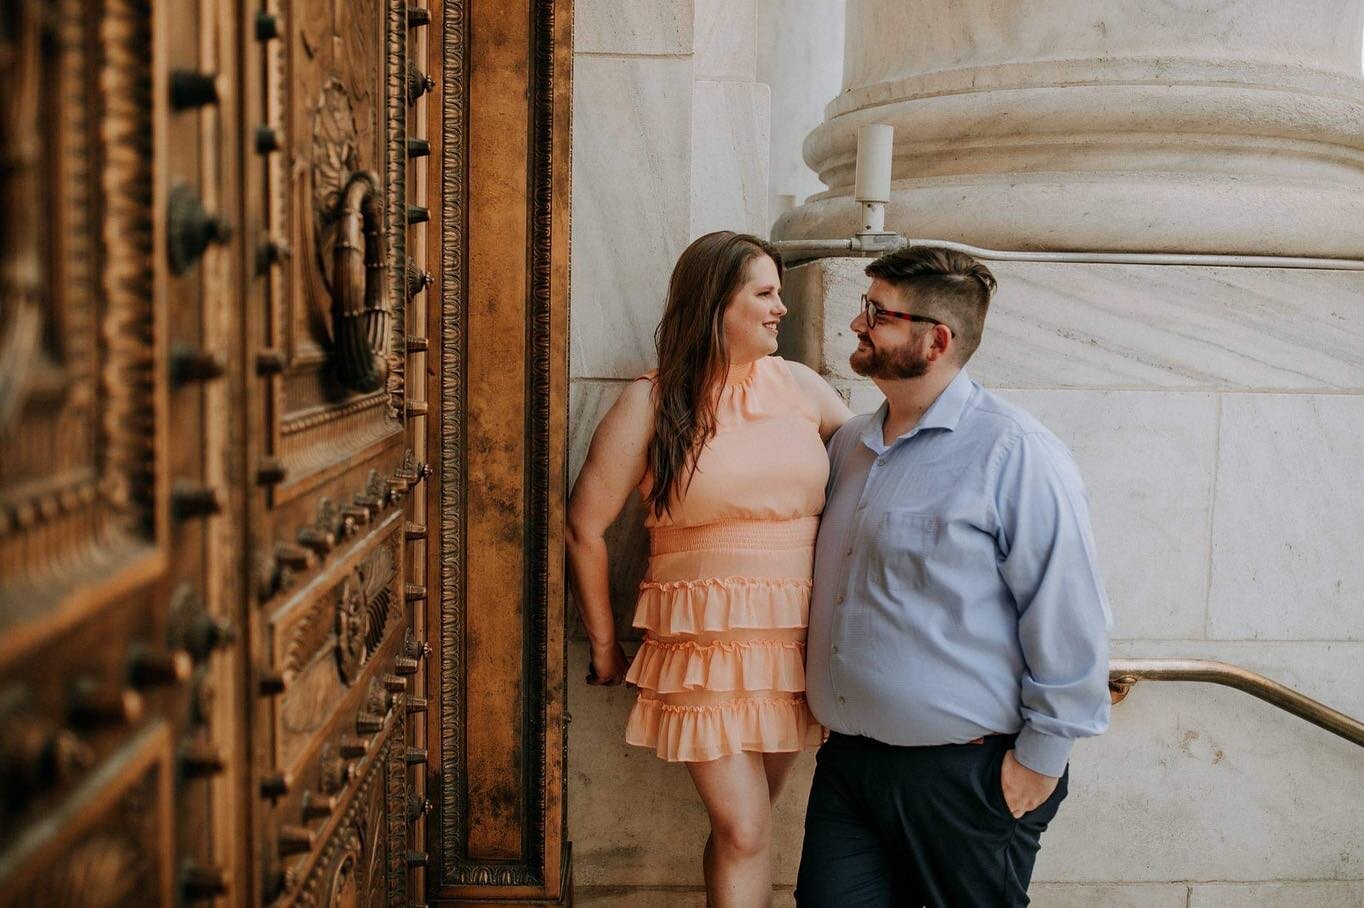 We had a blast with these two for their multi-location engagement session and we know their wedding day is going to be EPIC! #Danggett🤩🥰